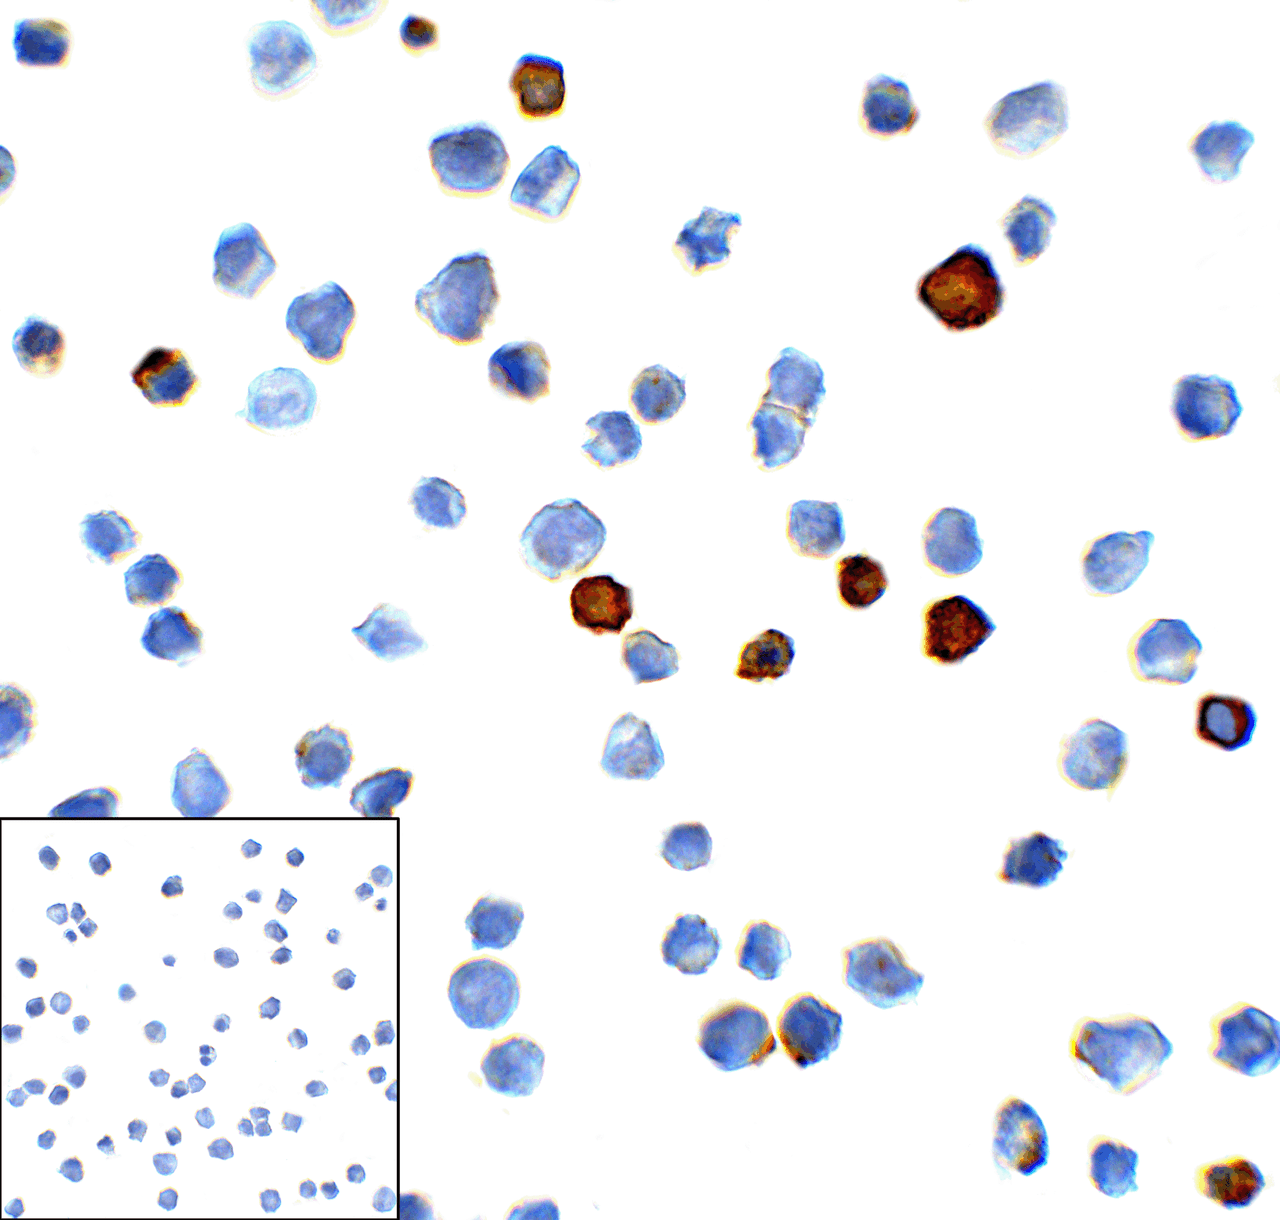 Immunocytochemistry of TIM-3 in transfected HEK293 cells with TIM-3 antibody at 1 ug/mL. Lower left: Immunocytochemistry in transfected HEK293 cells with control mouse IgG antibody at 1 ug/mL.